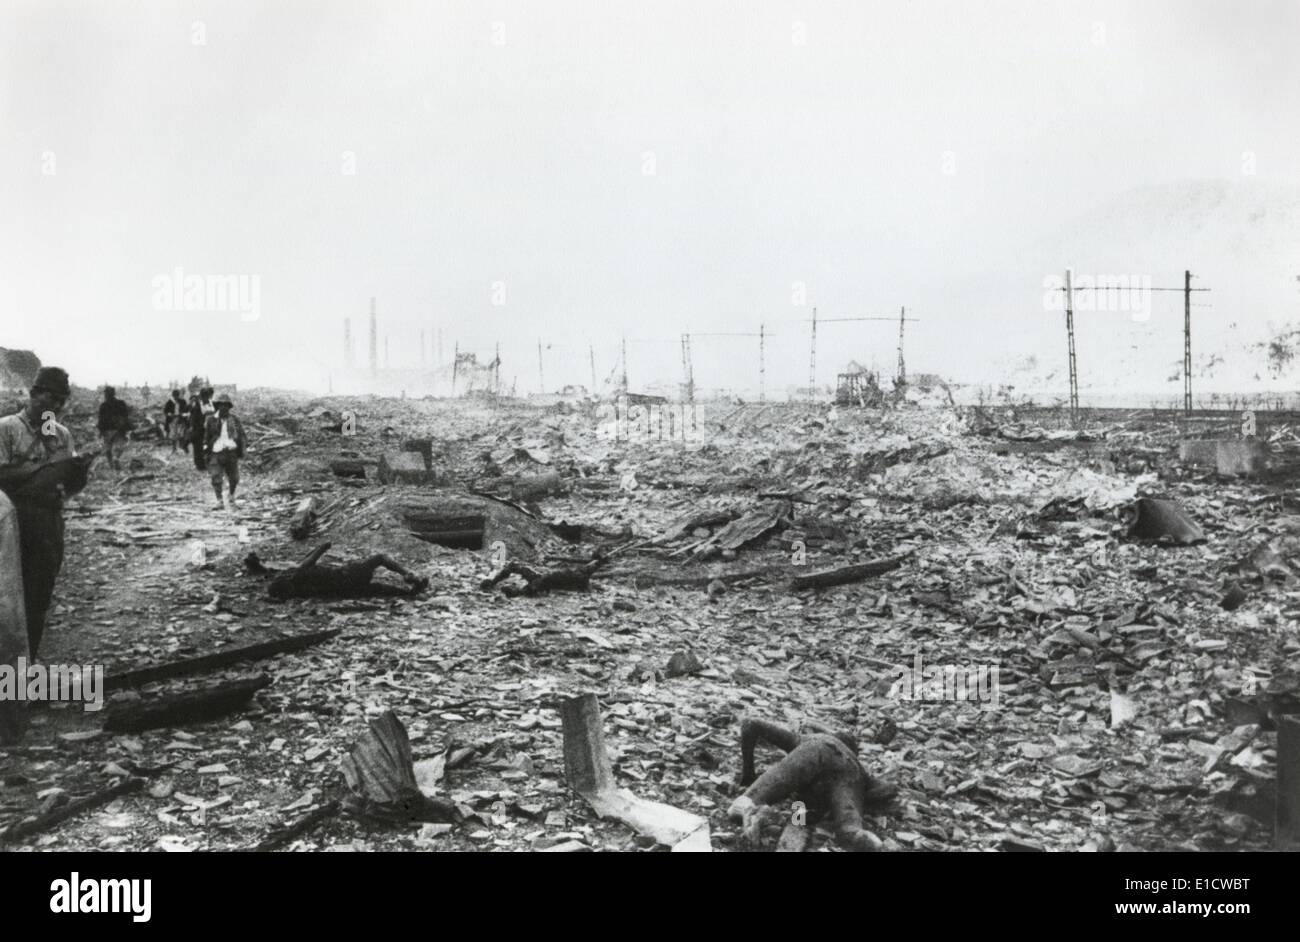 Ruins Of Nagasaki Japan After Atomic Bombing Of August 9 1945 Government Officials Walk Amid Radioactive Debris And Burnt Stock Photo Alamy